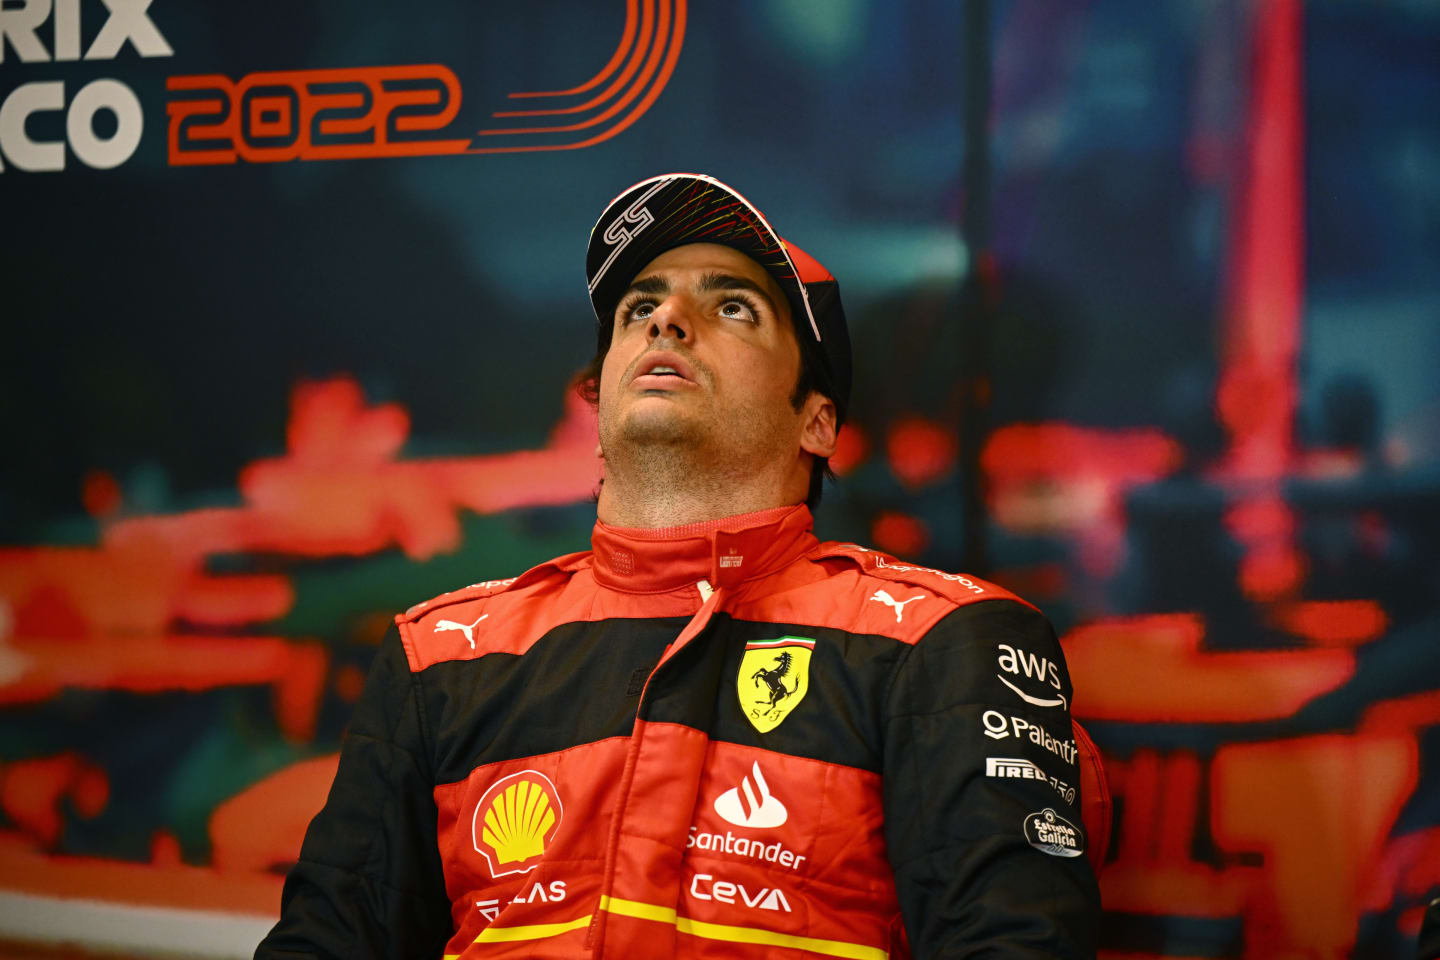 MONTE-CARLO, MONACO - MAY 28: Second placed qualifier Carlos Sainz of Spain and Ferrari looks on in the press conference after qualifying ahead of the F1 Grand Prix of Monaco at Circuit de Monaco on May 28, 2022 in Monte-Carlo, Monaco. (Photo by Clive Mason/Getty Images)